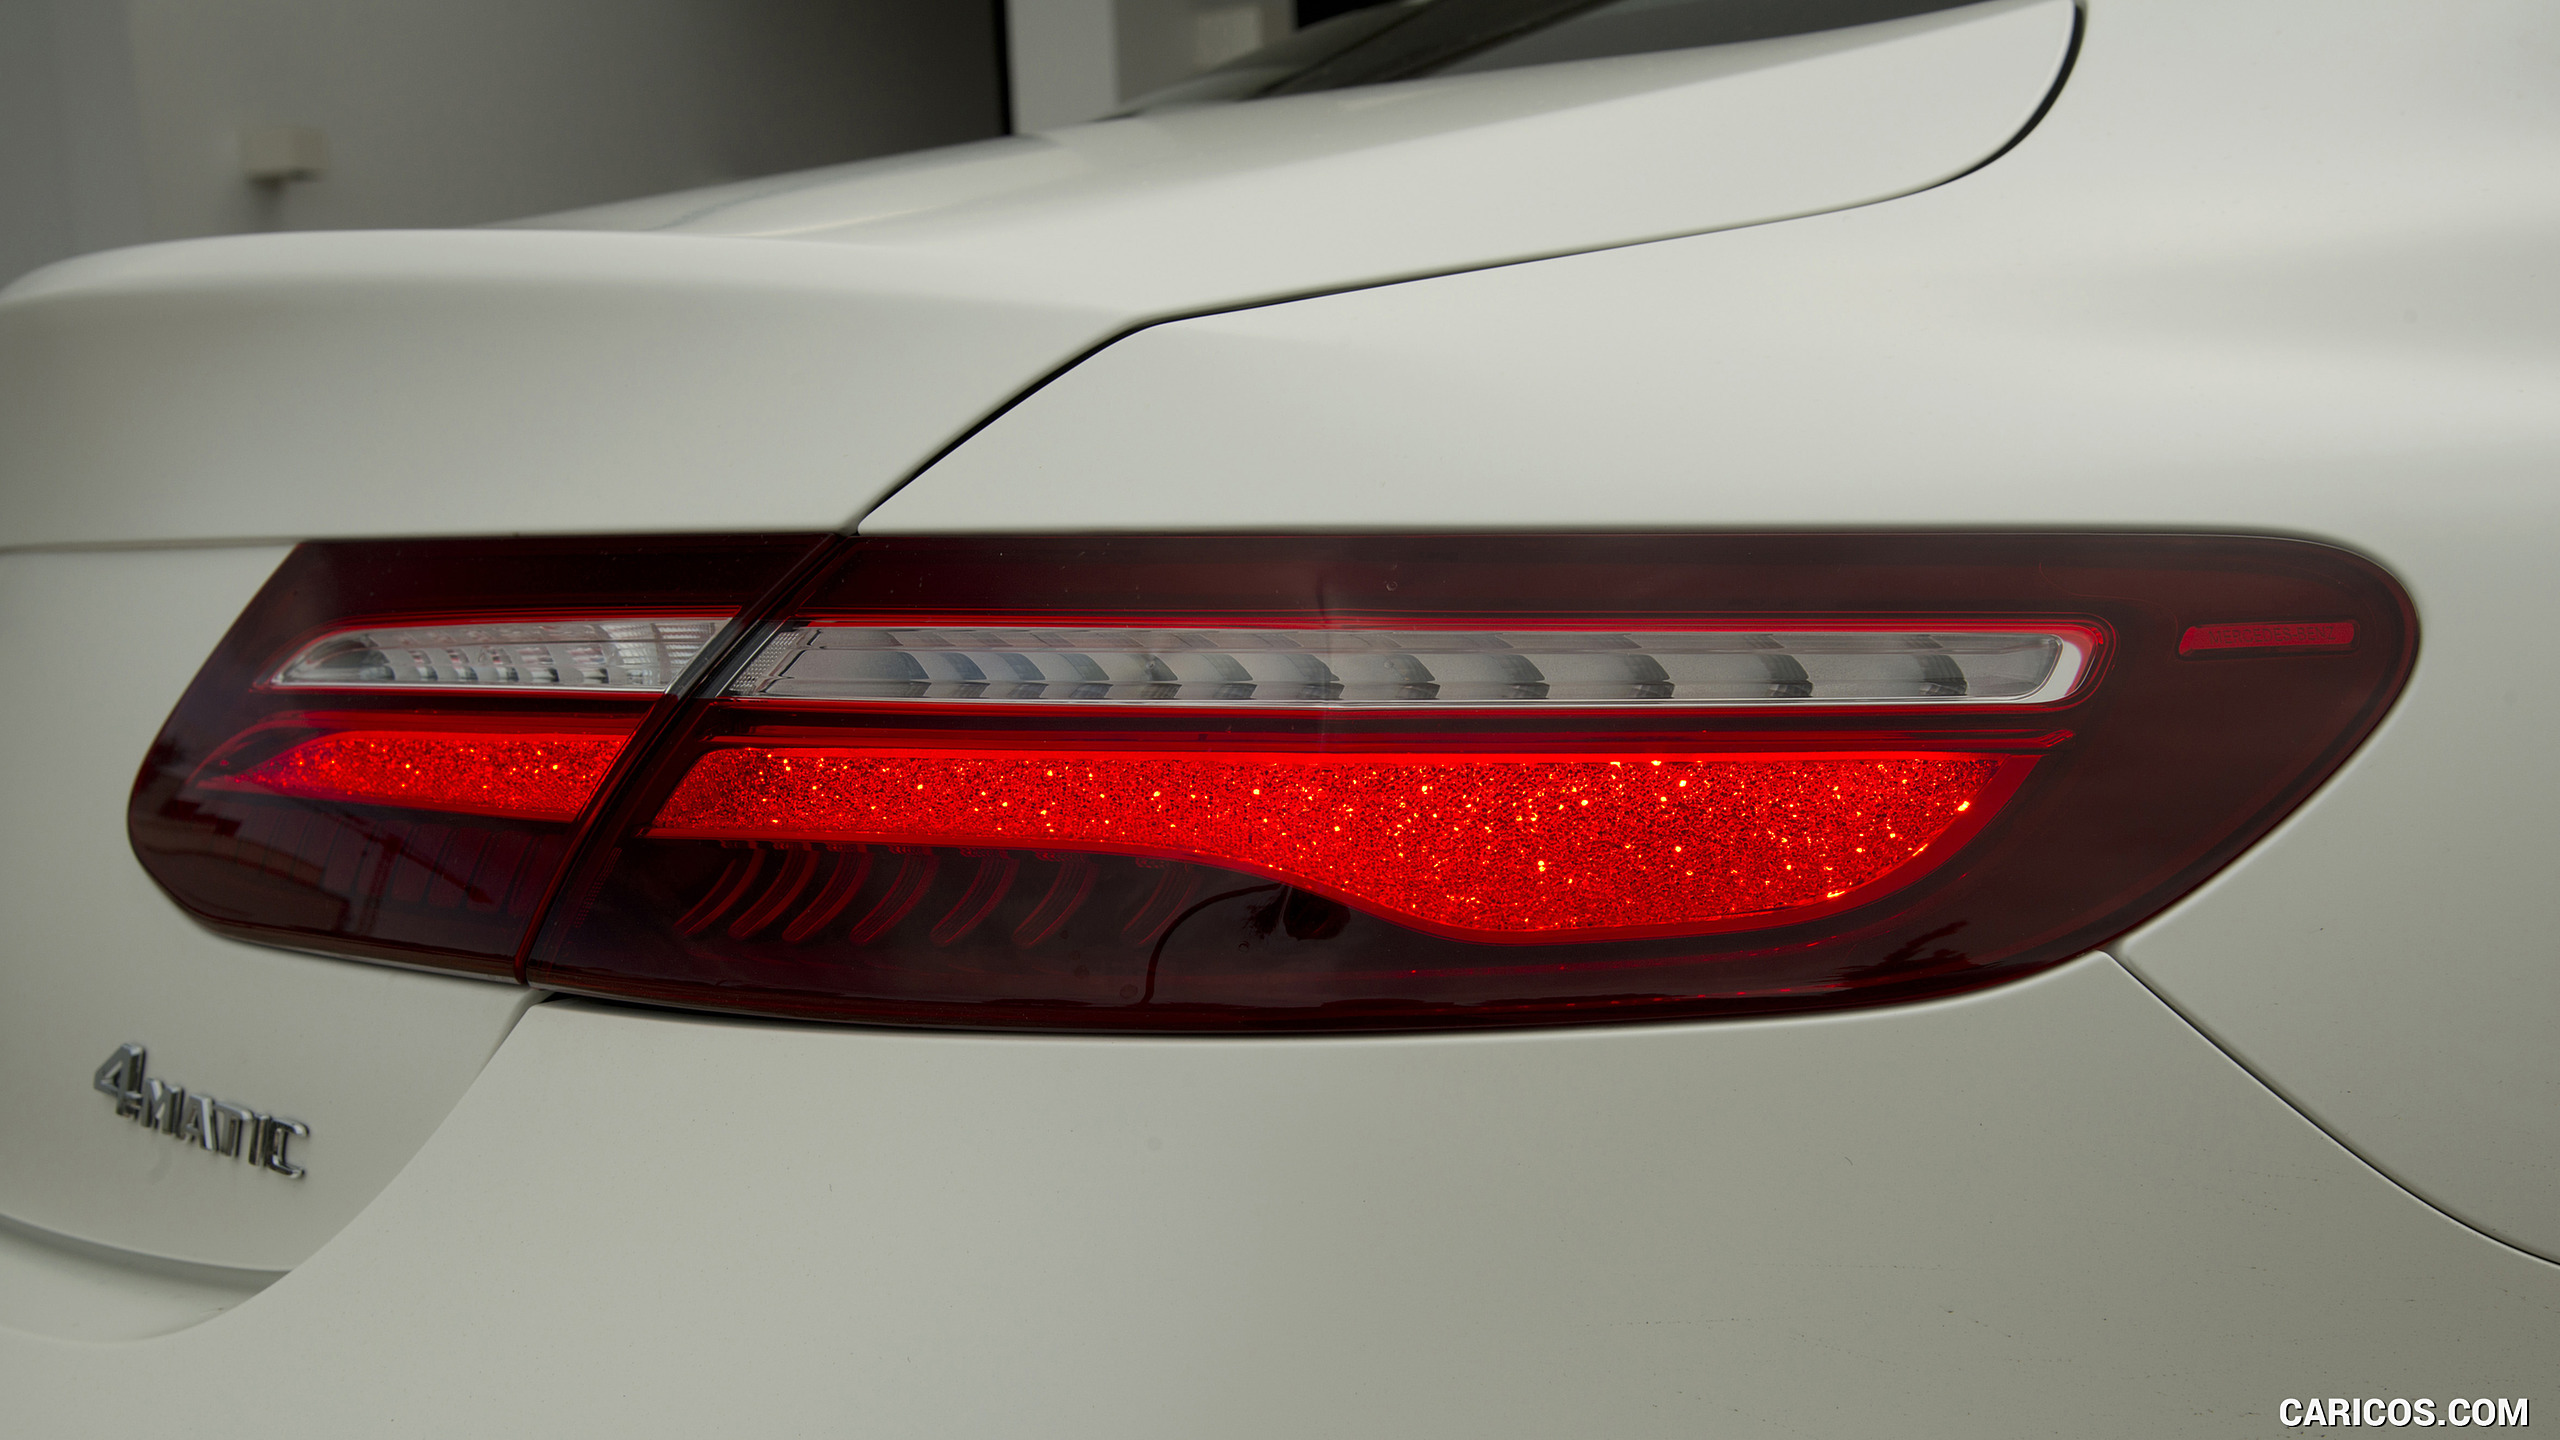 2018 Mercedes-Benz E400 Coupe 4MATIC - Tail Light, #146 of 365